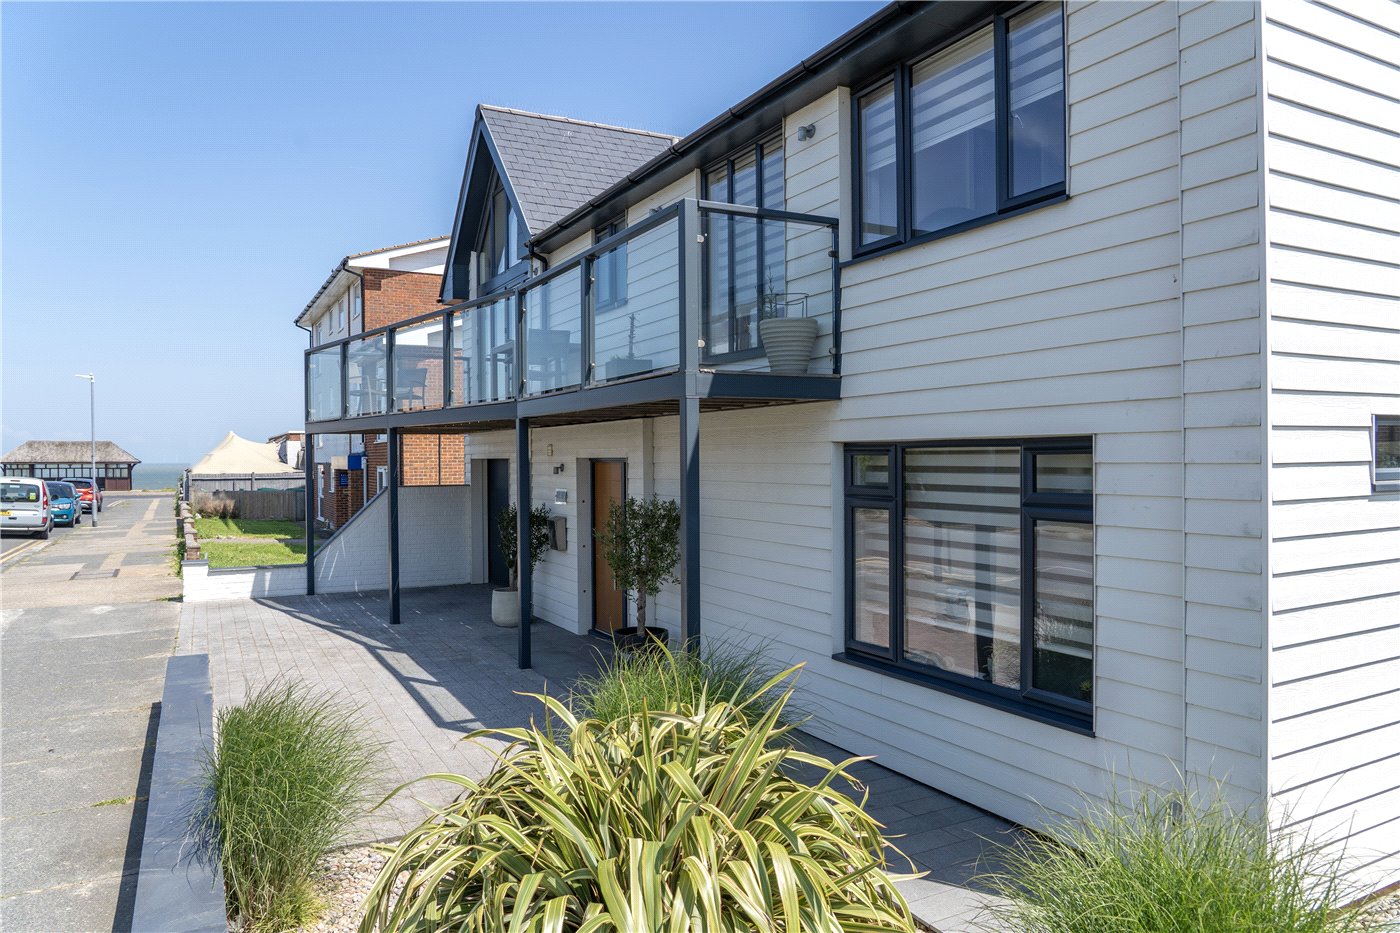 Pier Avenue, Whitstable, Kent, CT5